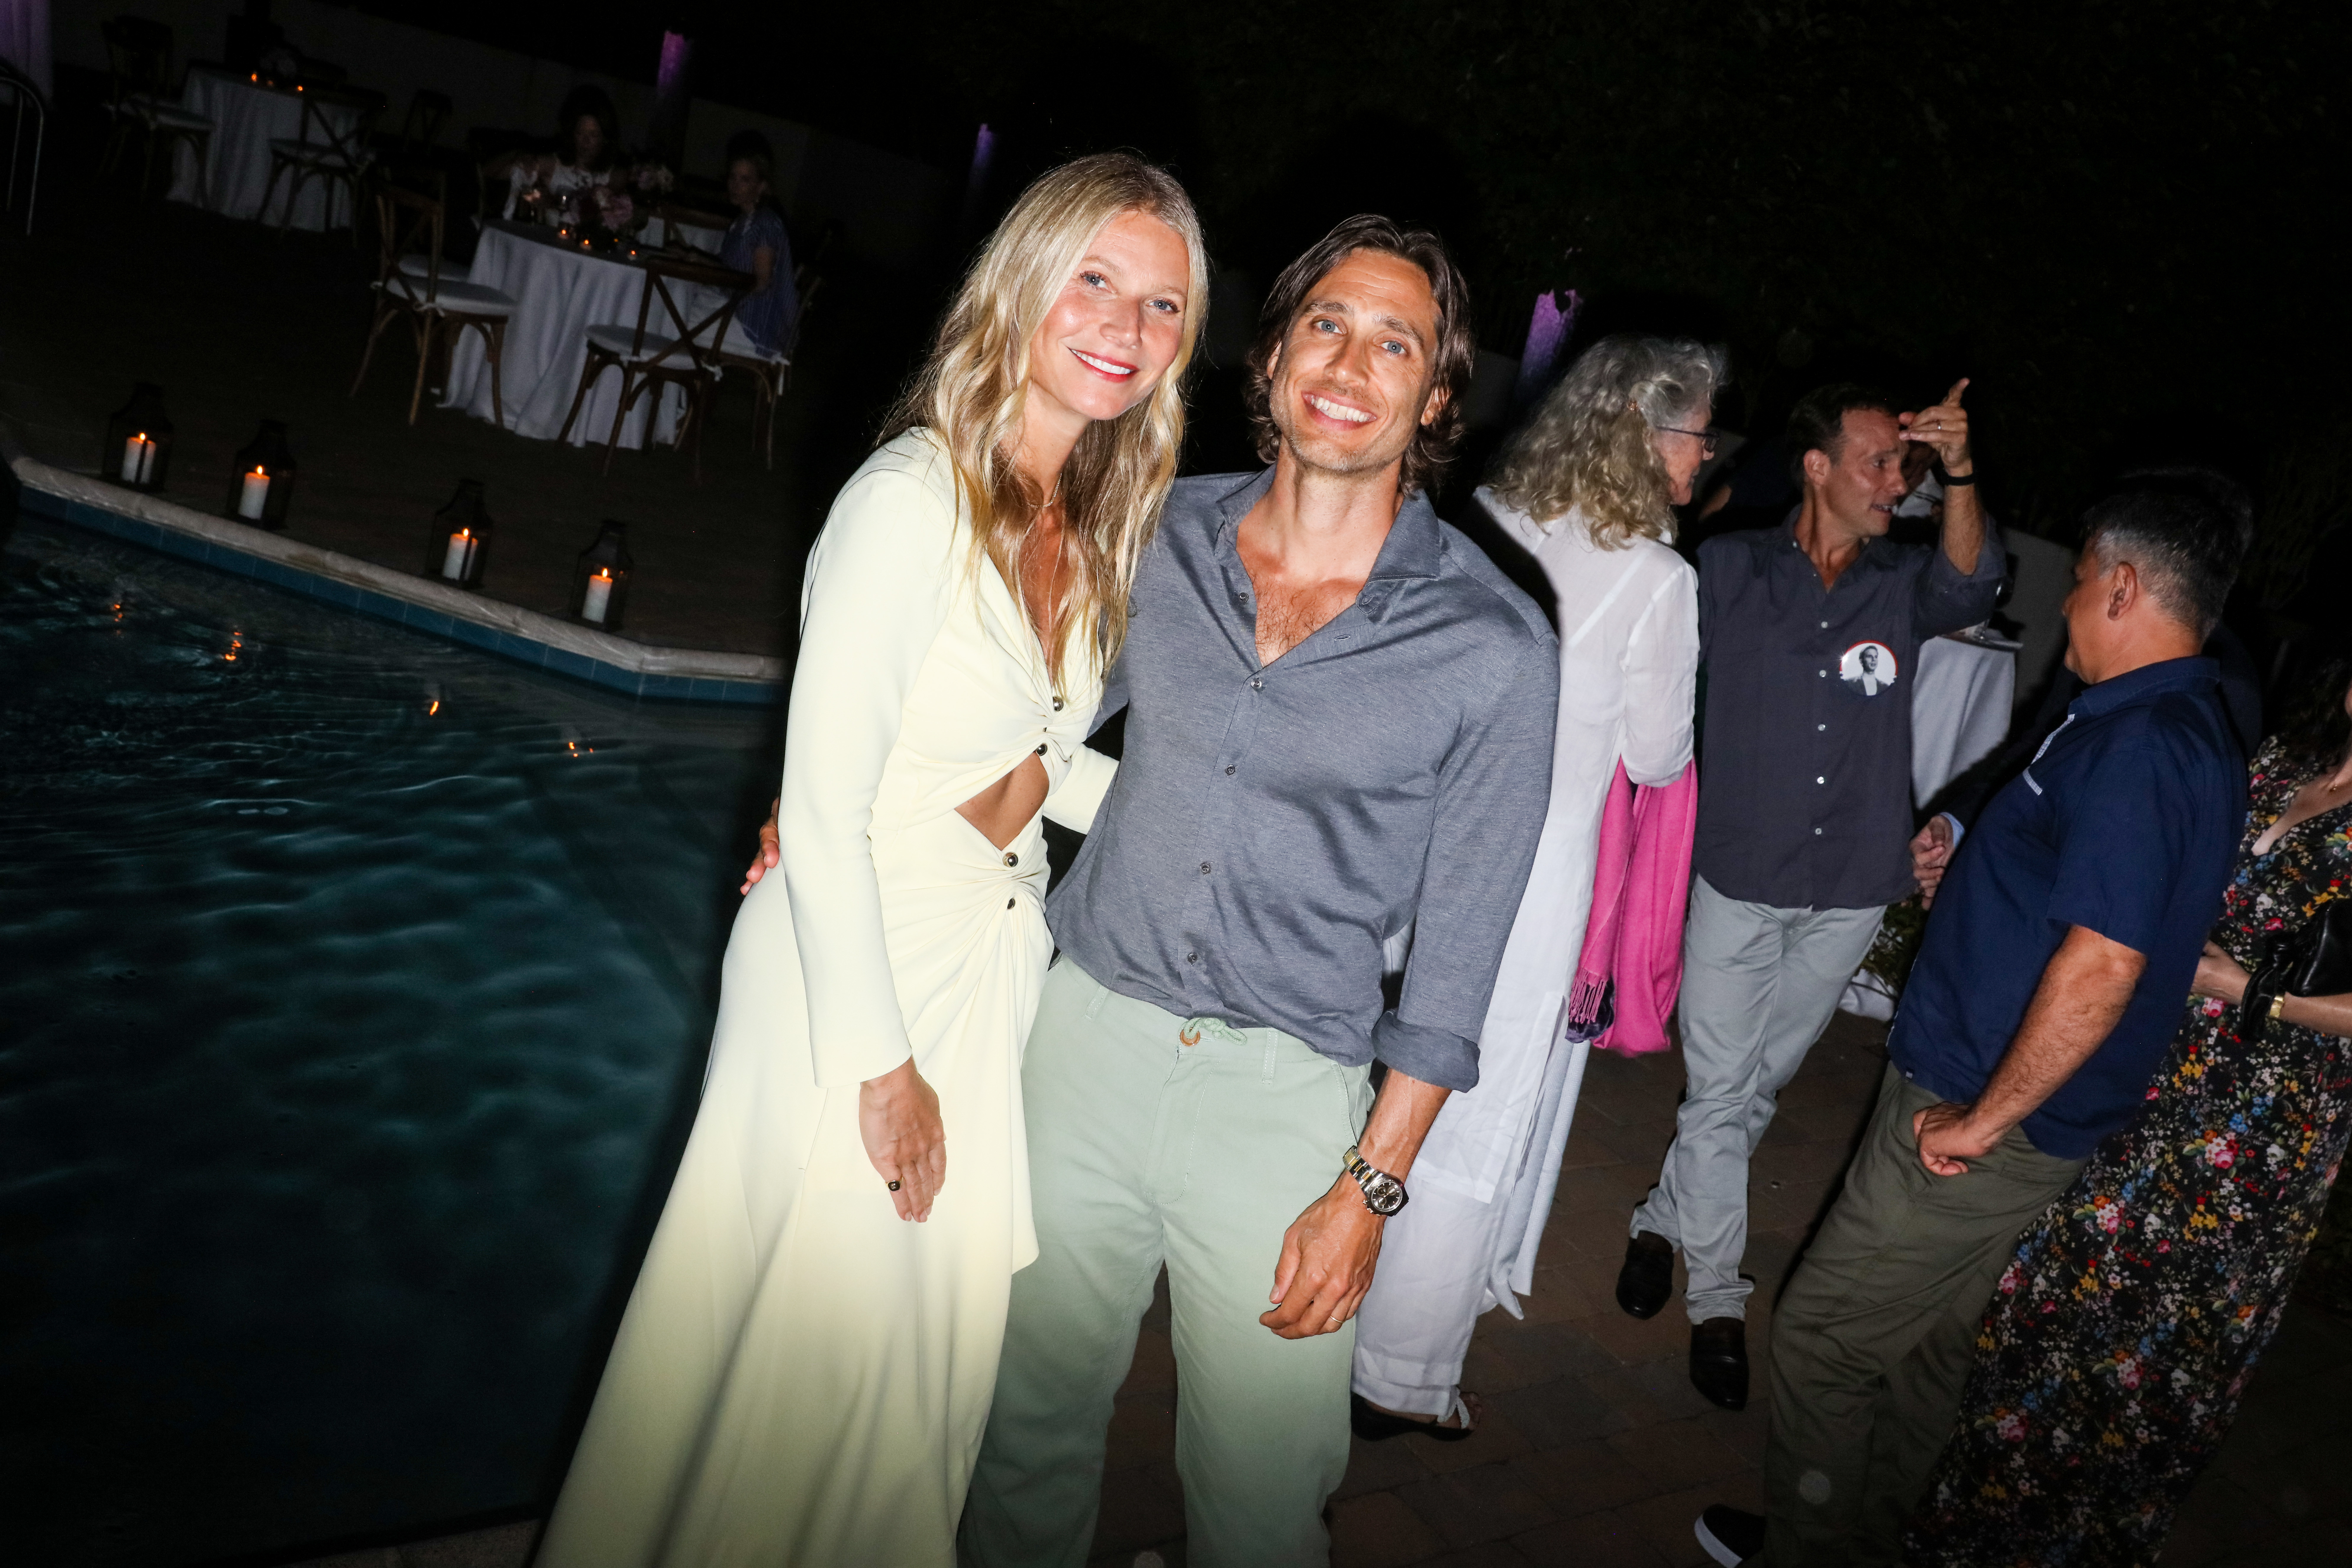 Gwyneth Paltrow and Brad Falchuk attend a promotional party for Netflix's "The Politician" at a private home, on August 2, 2019, in East Hampton, New York. | Source: Getty Images